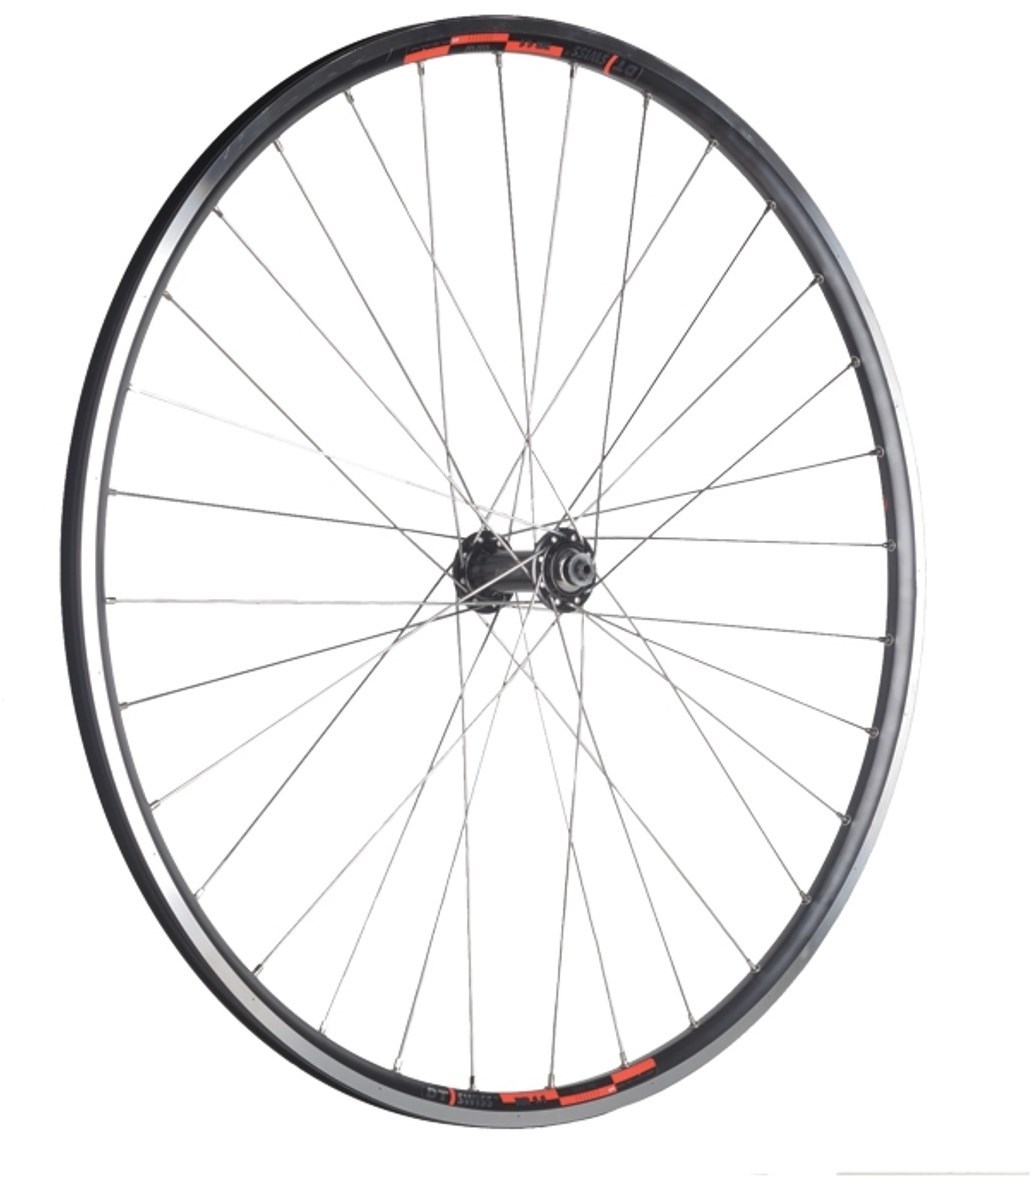 M Part Shimano 105 Hub on DT Swiss RR 1.1 Rim Complete Wheel product image